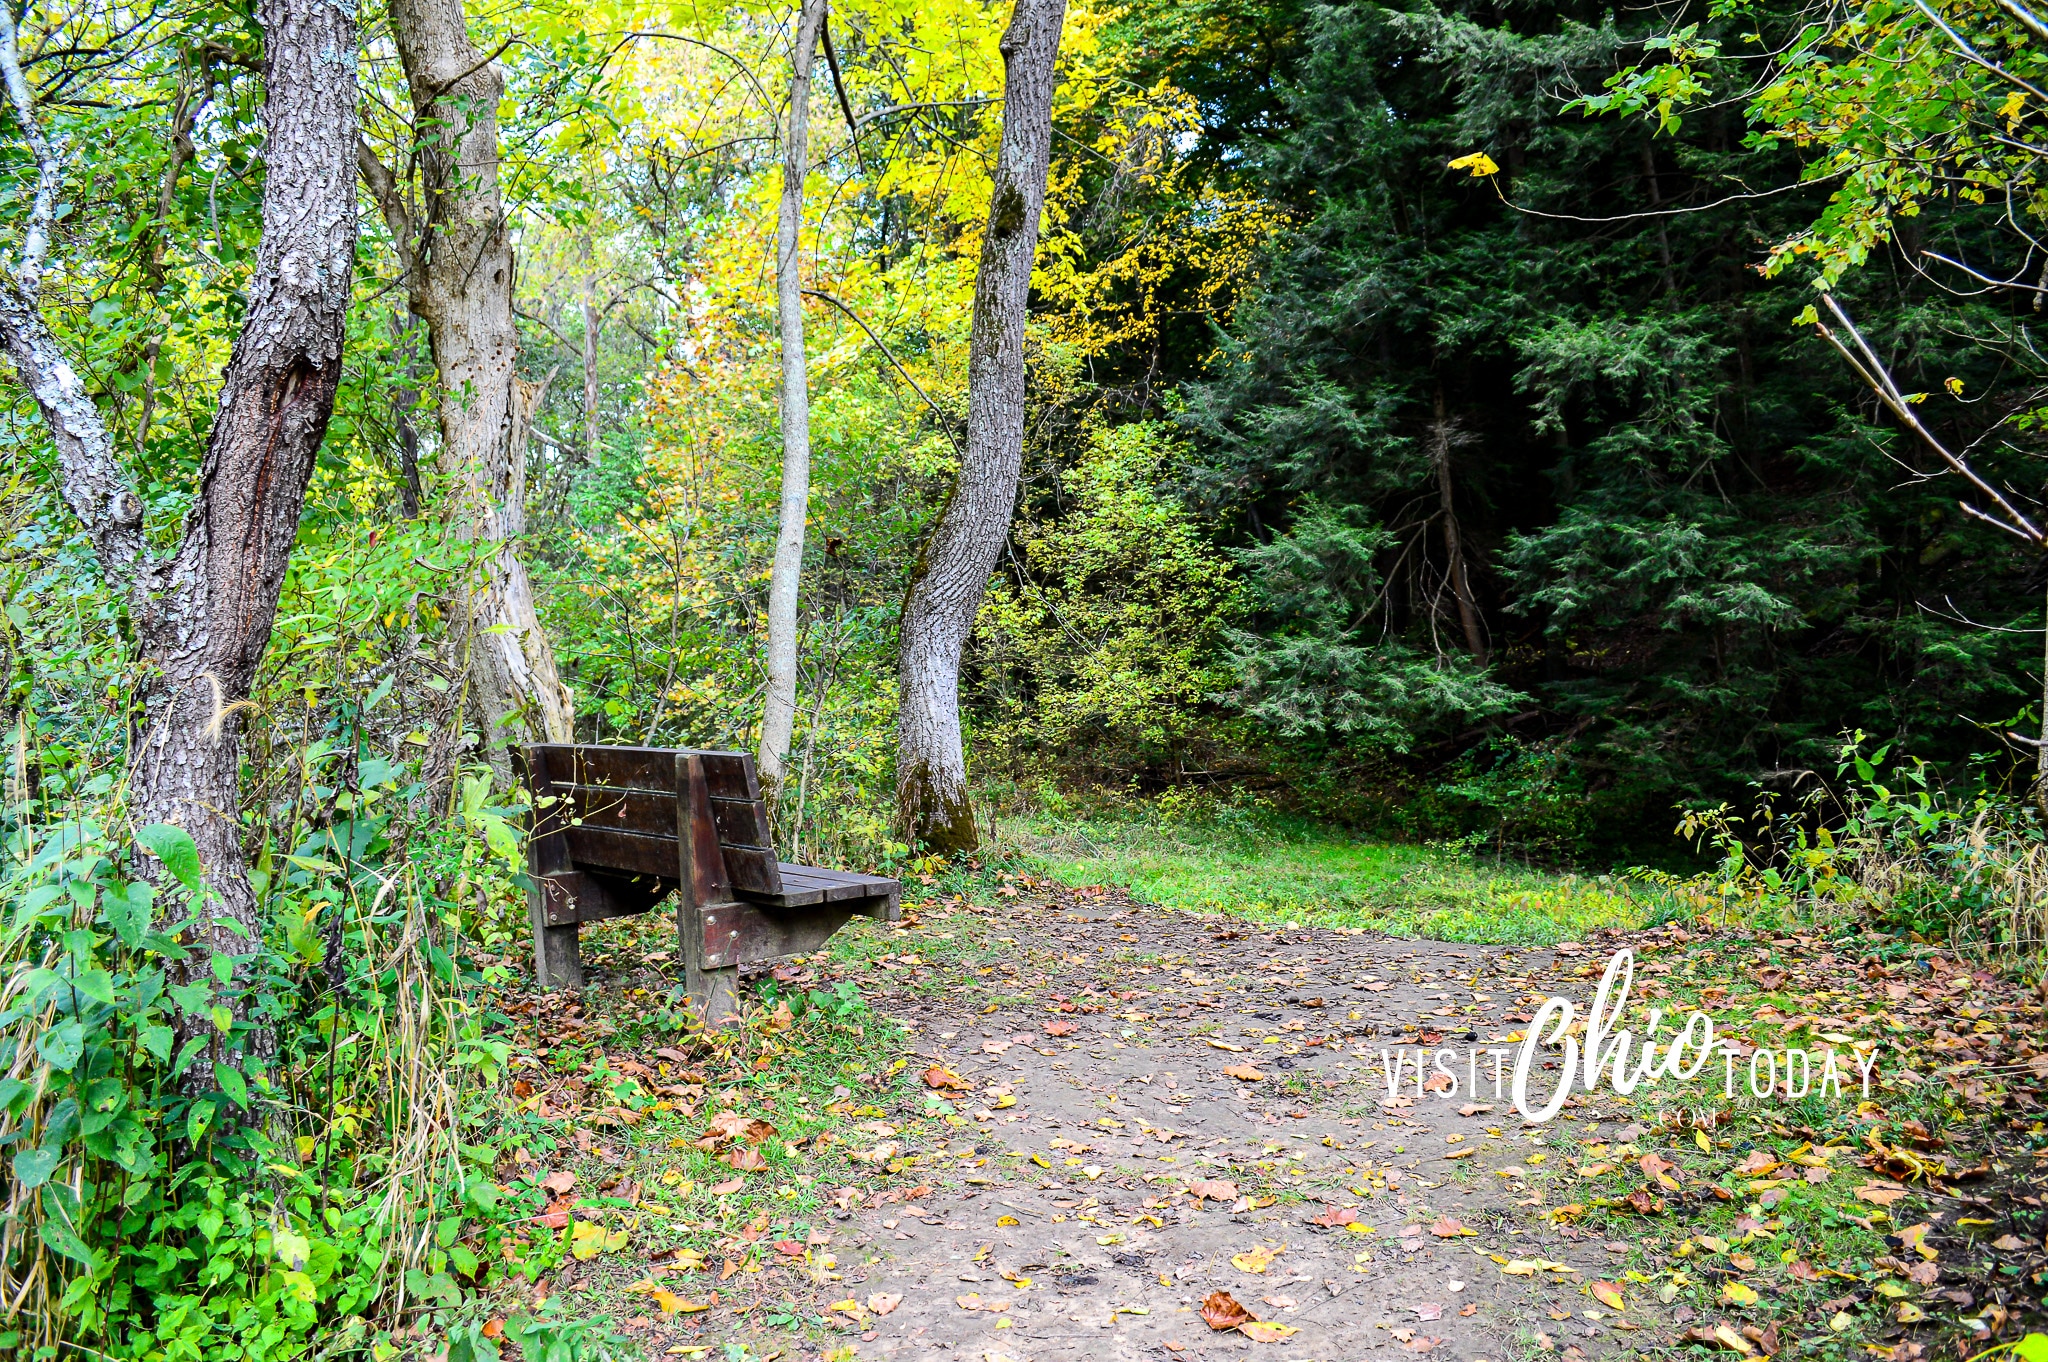 horizontal photo of a bench amongst the trees at clear creek metro park. Photo credit: Cindy Gordon of VisitOhioToday.com